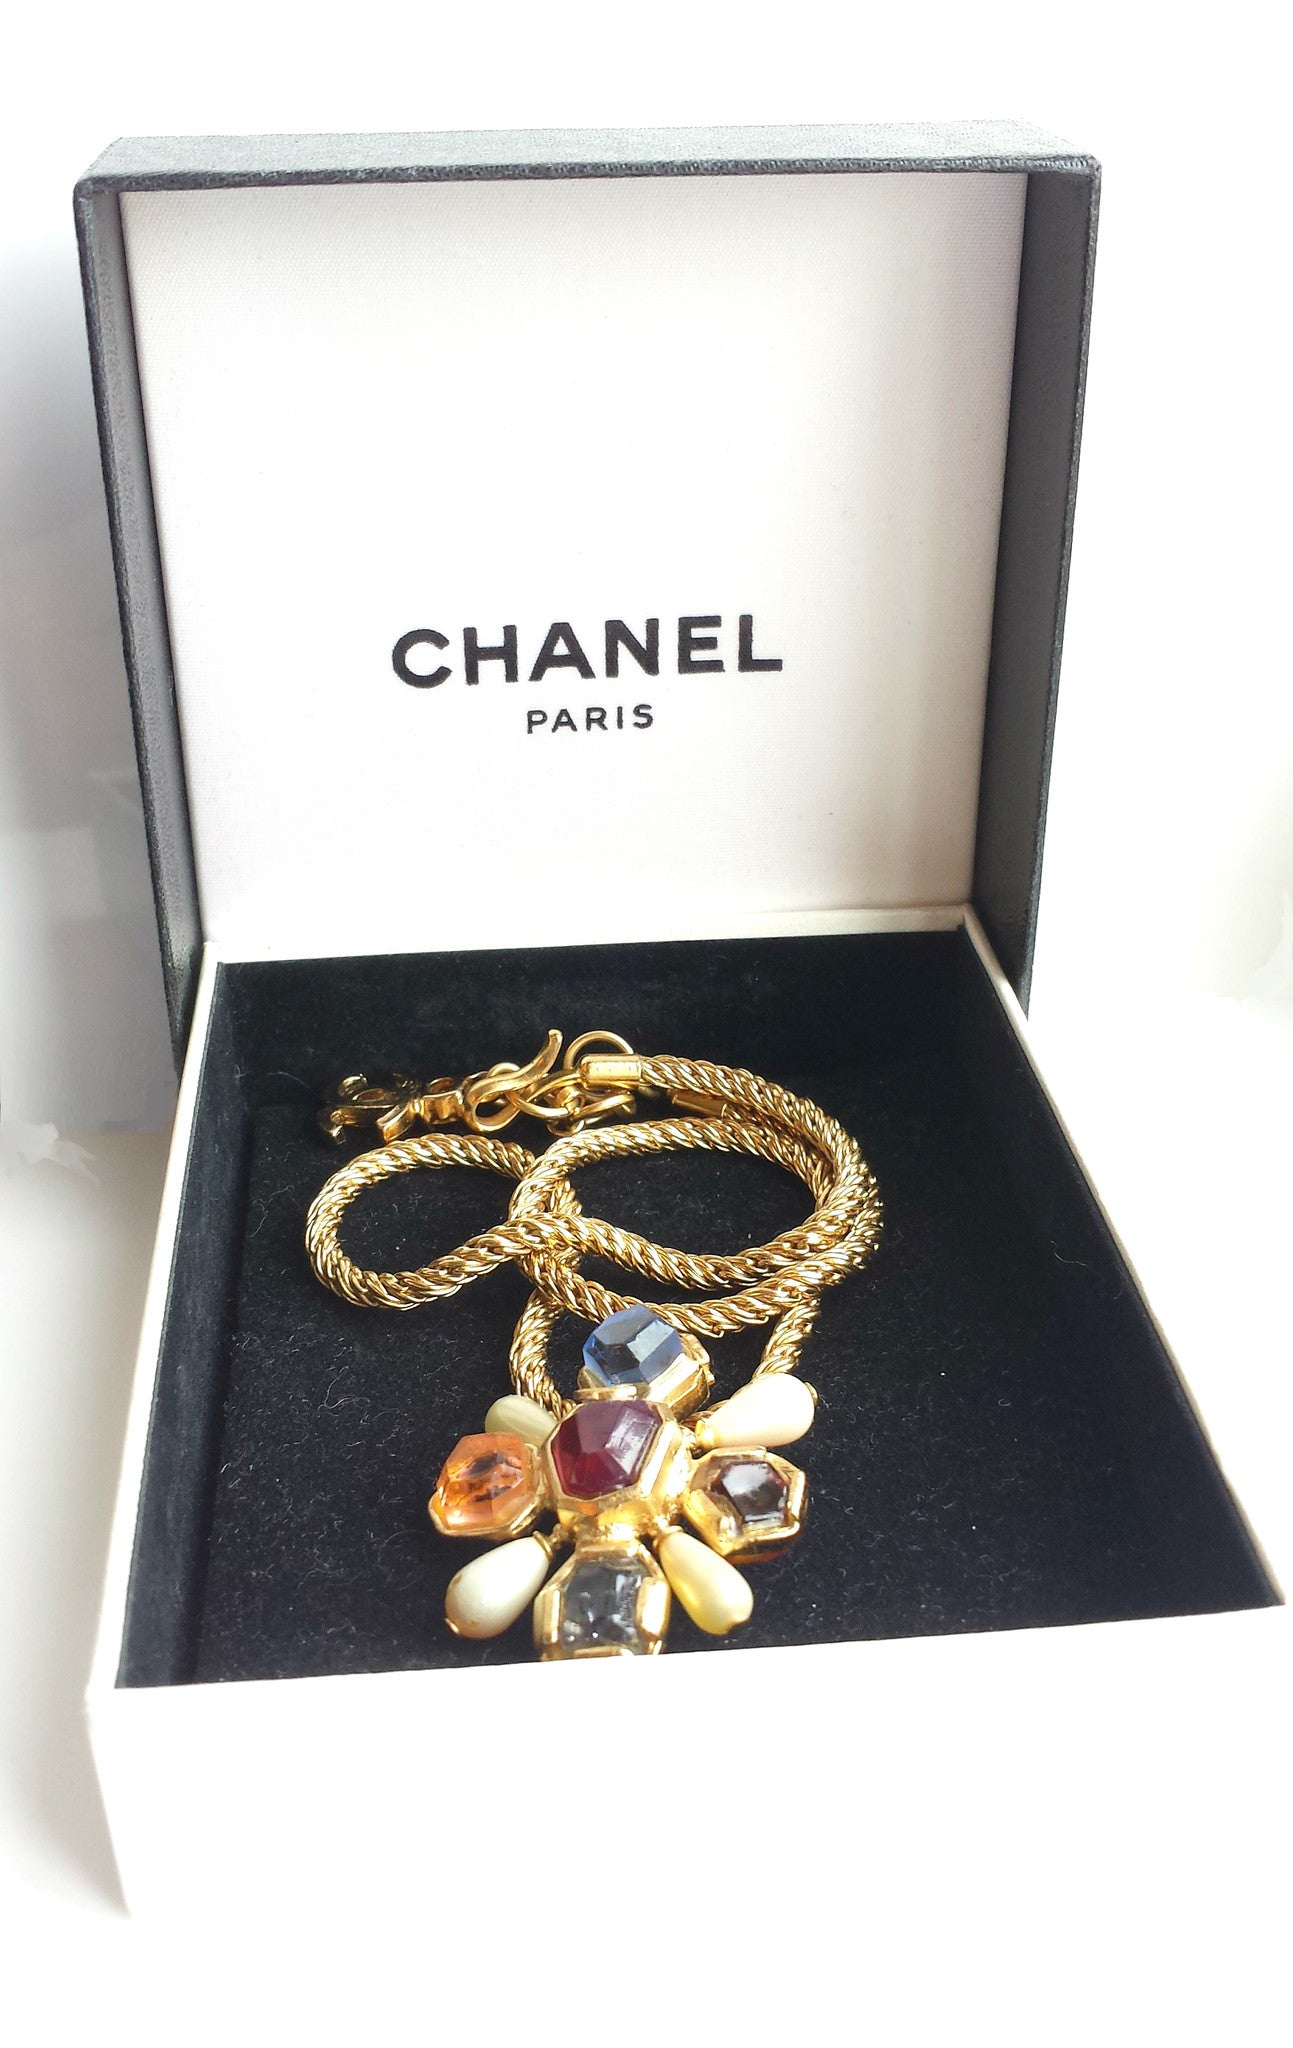 Chanel 01A 2001 Byzantine Cross Gripoix Poured Glass Coloured Stone Necklace with Faux Pearls